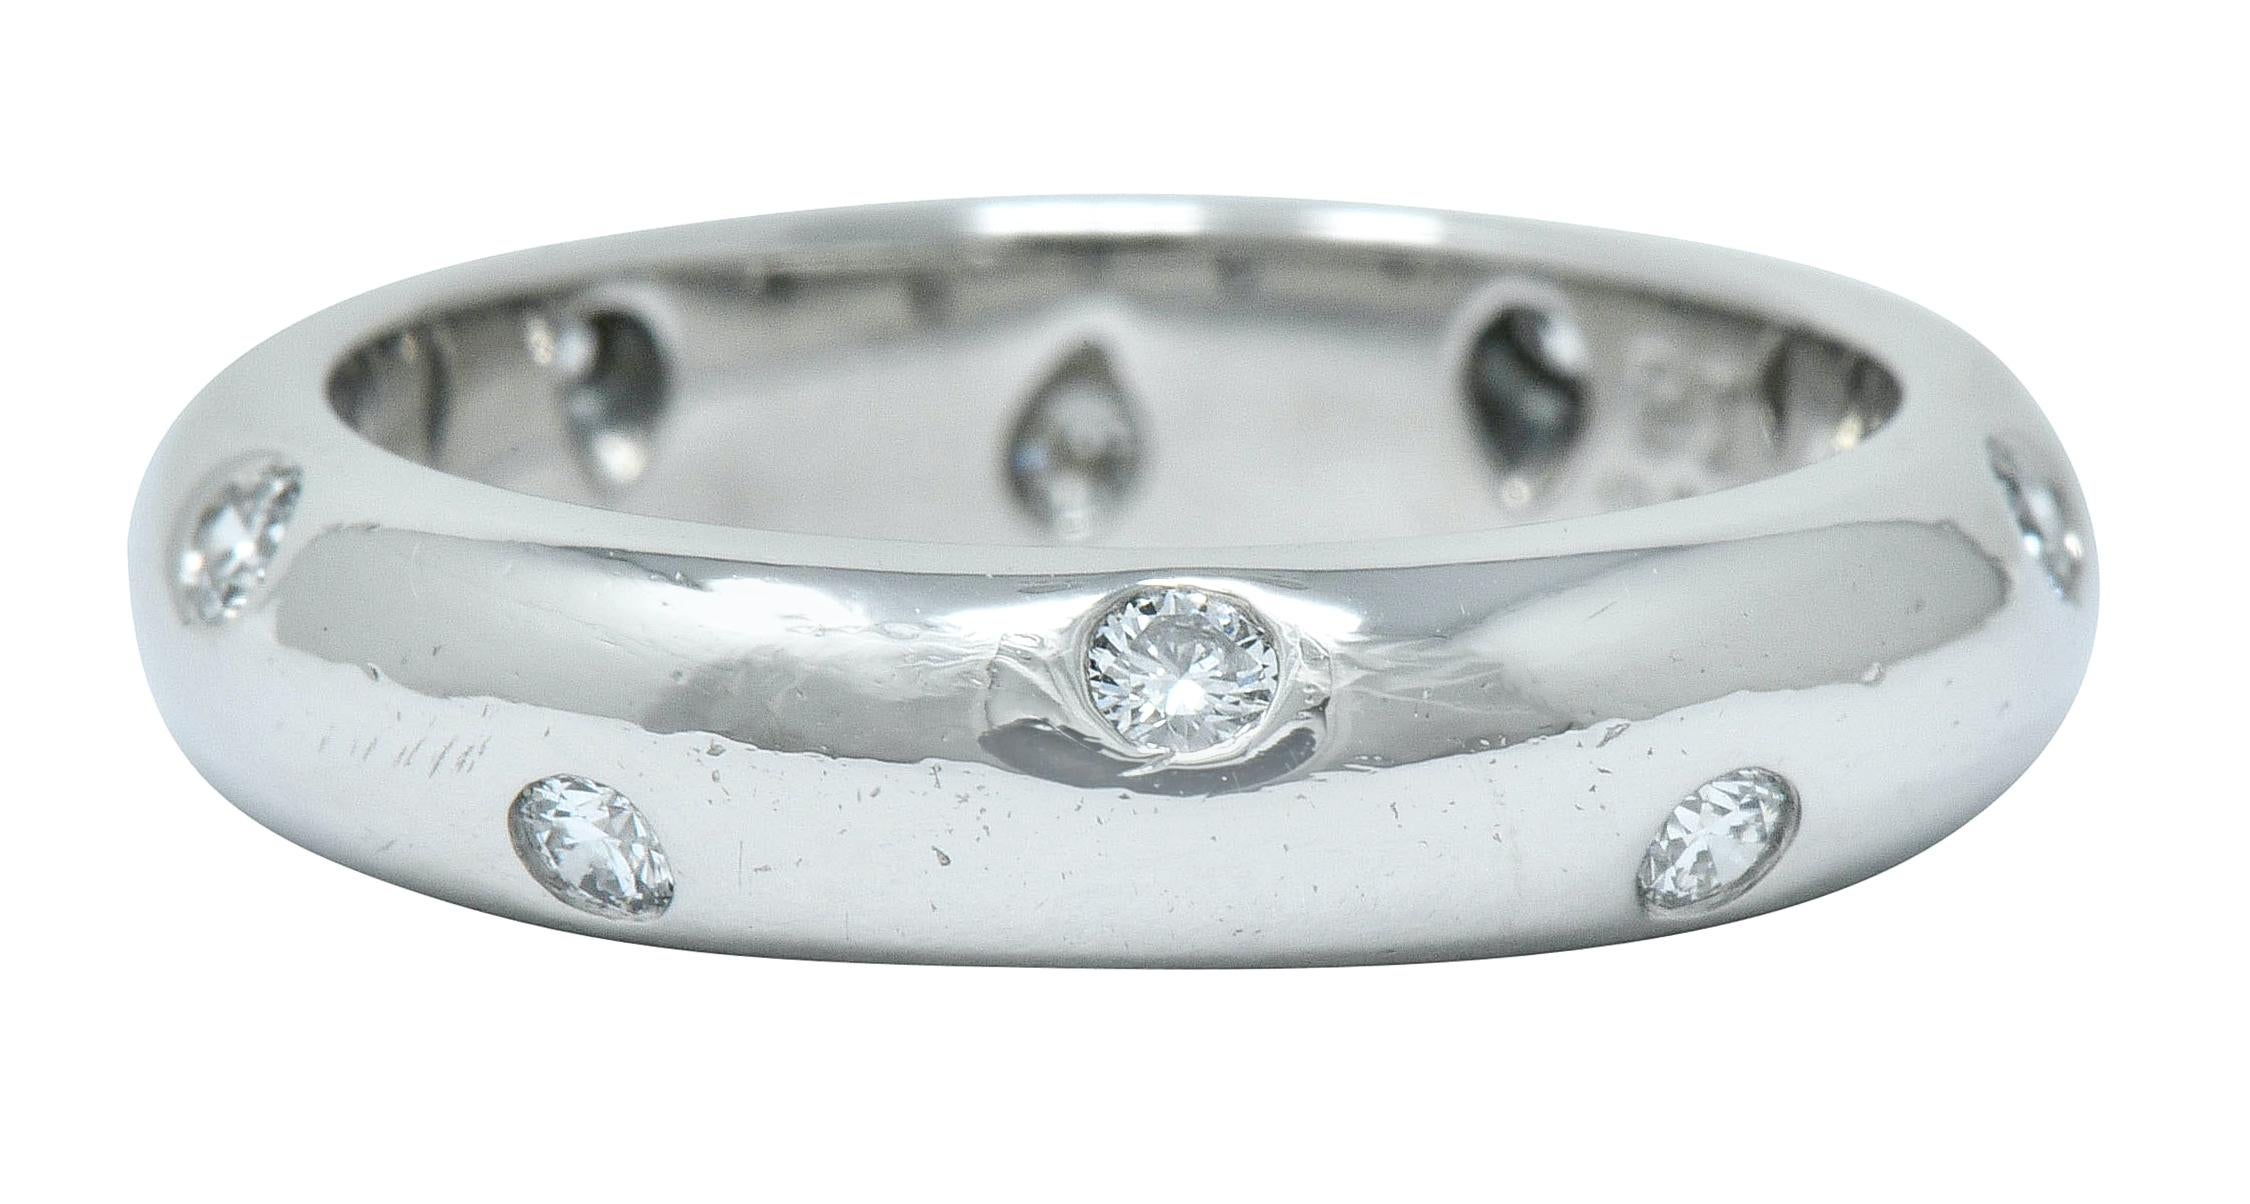 Band style ring polished bright with rounded curvature

Flush set with nine round brilliant cut diamonds weighing approximately 0.22 carat; F/G color with VS clarity

Signed T & Co. and stamped PT950 for platinum

From the contemporary Etolie